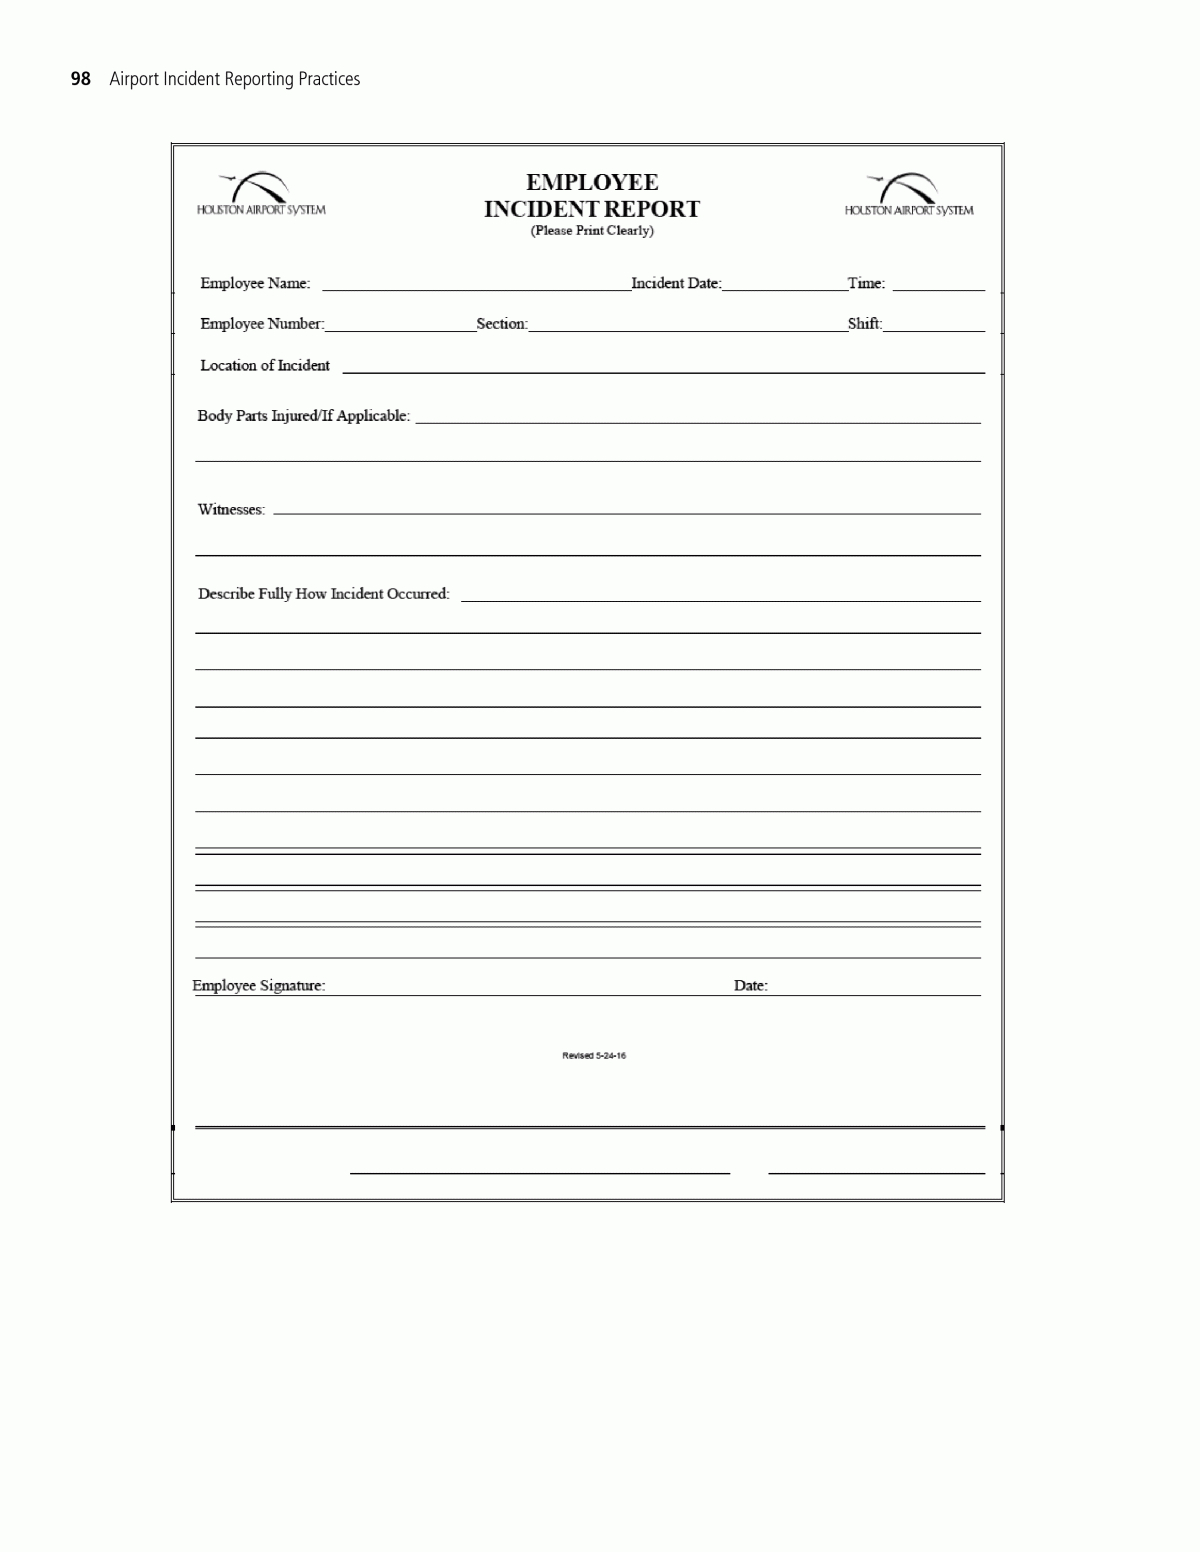 Appendix H - Sample Employee Incident Report Form | Airport Pertaining To Incident Report Book Template